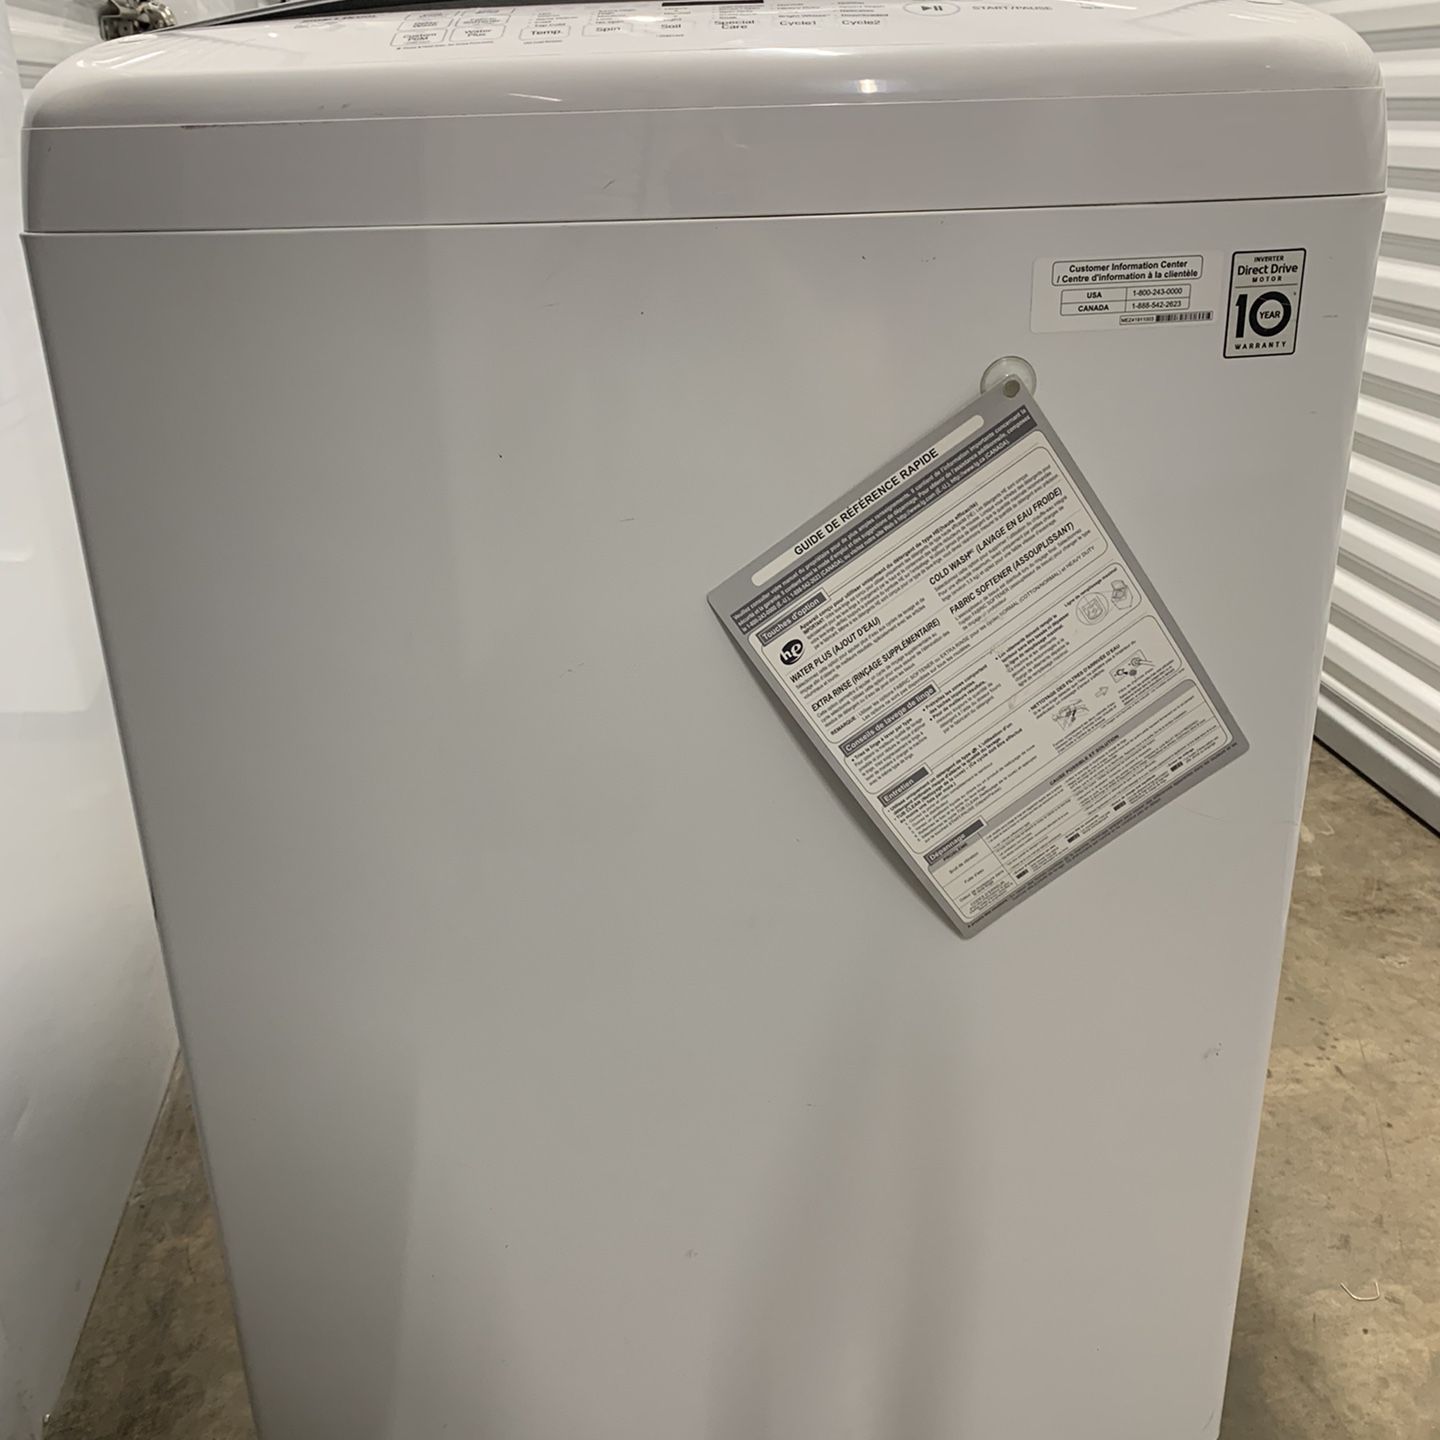 Large capacity washer and dryer from LG